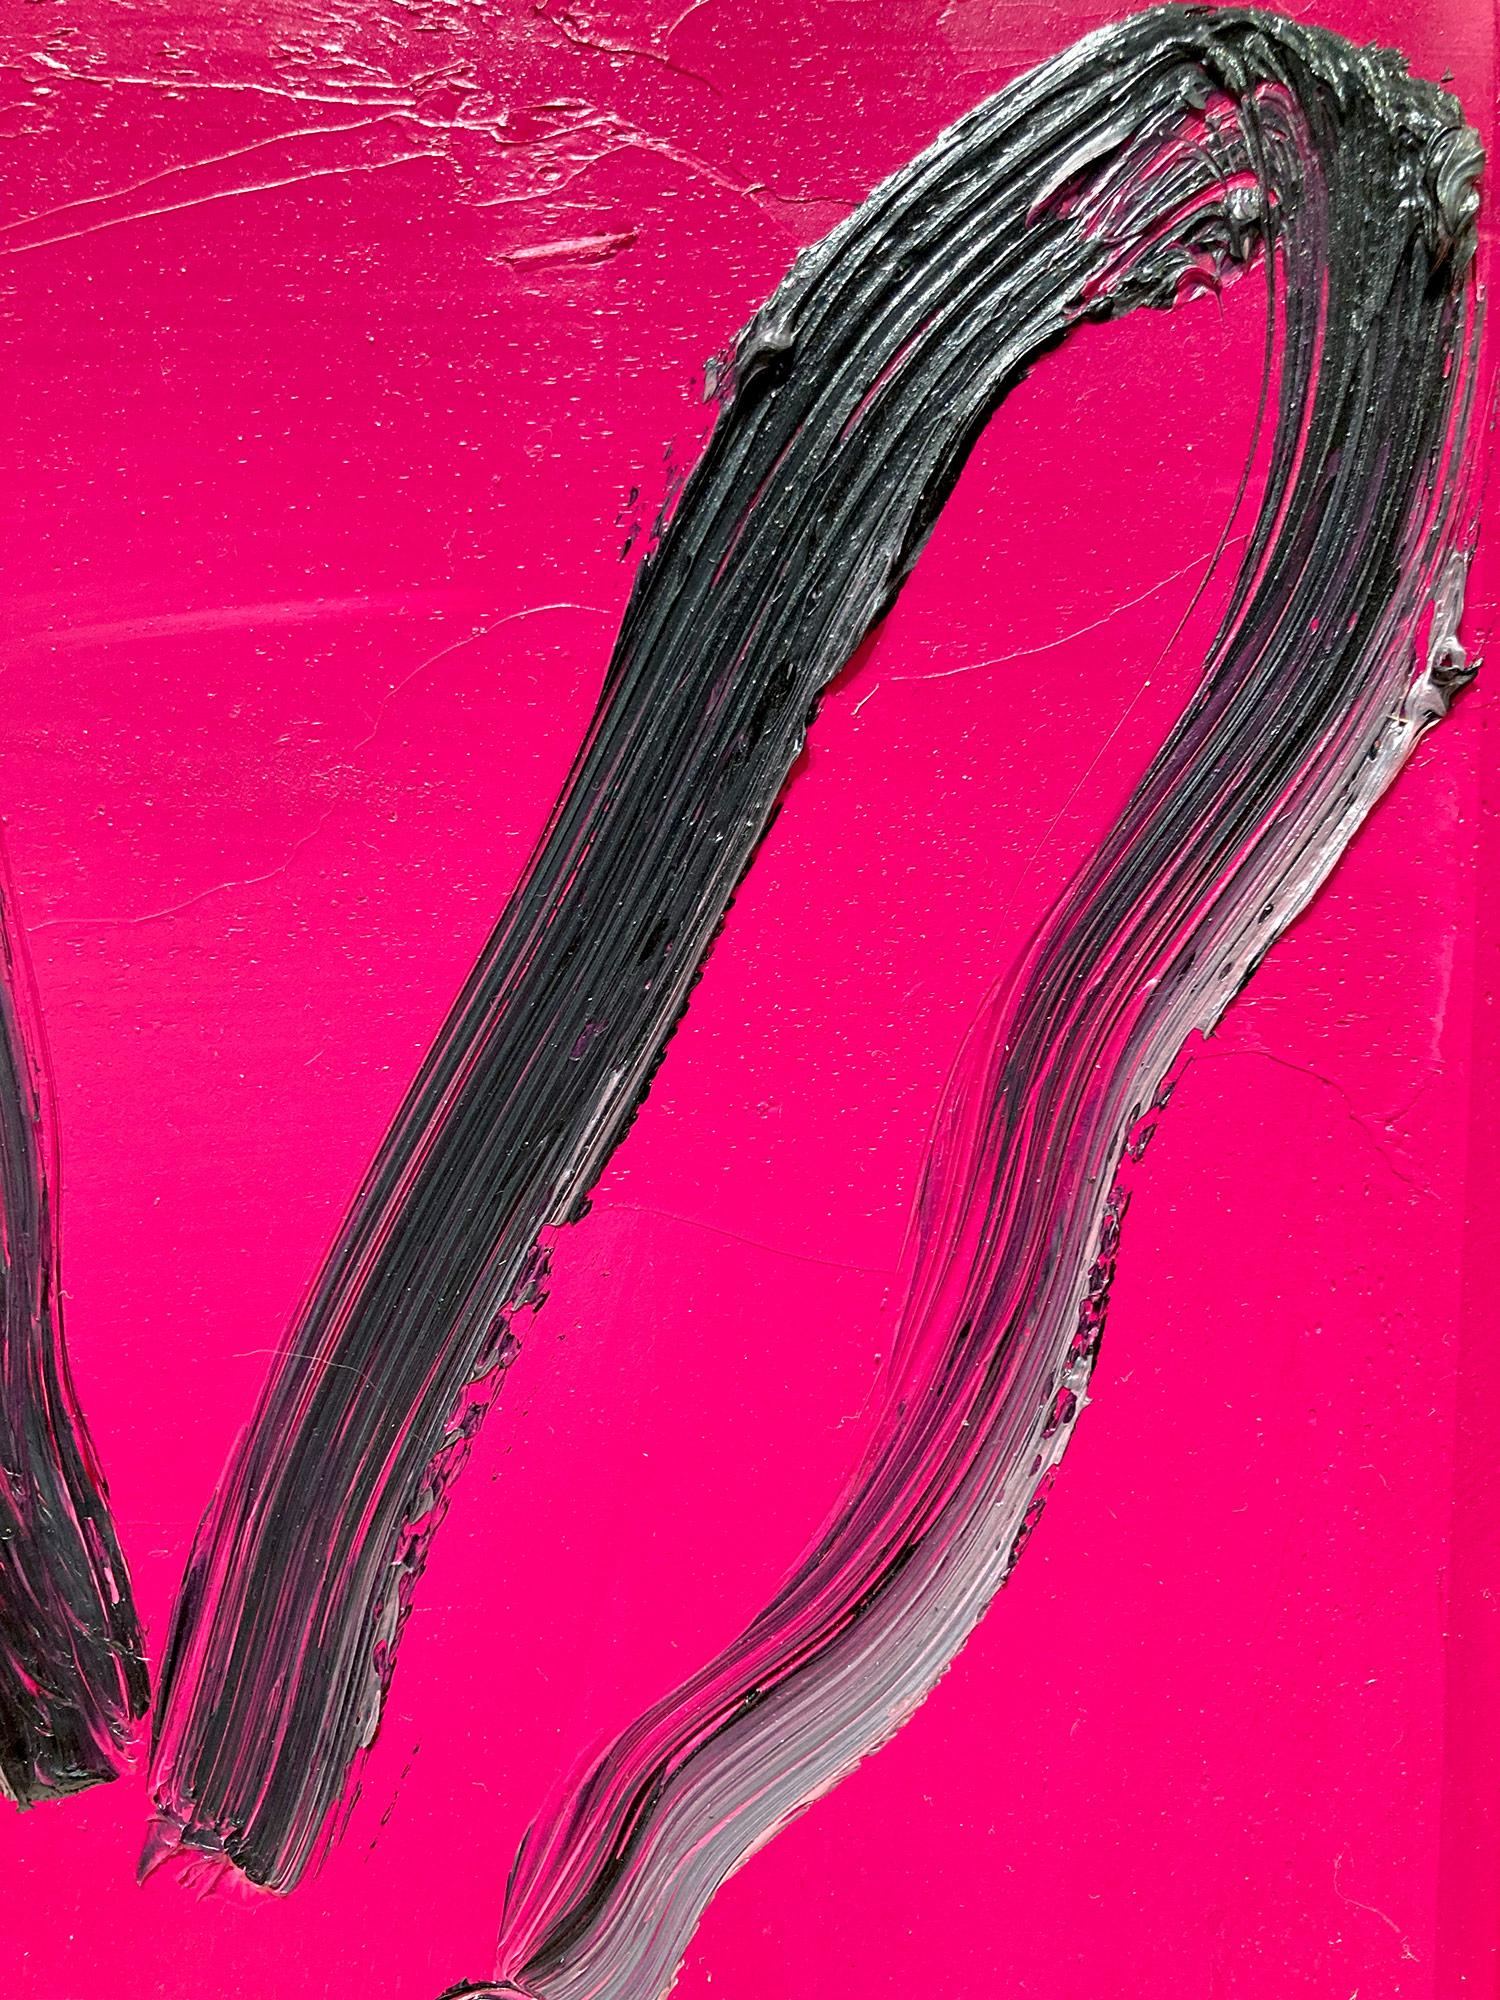 A wonderful composition of one of Slonem's most iconic subjects, Bunnies. This piece depicts a gestural figure of a black bunny on a Hot Pink background with thick use of paint. It is housed in a wonderful antique style frame. Inspired by nature and